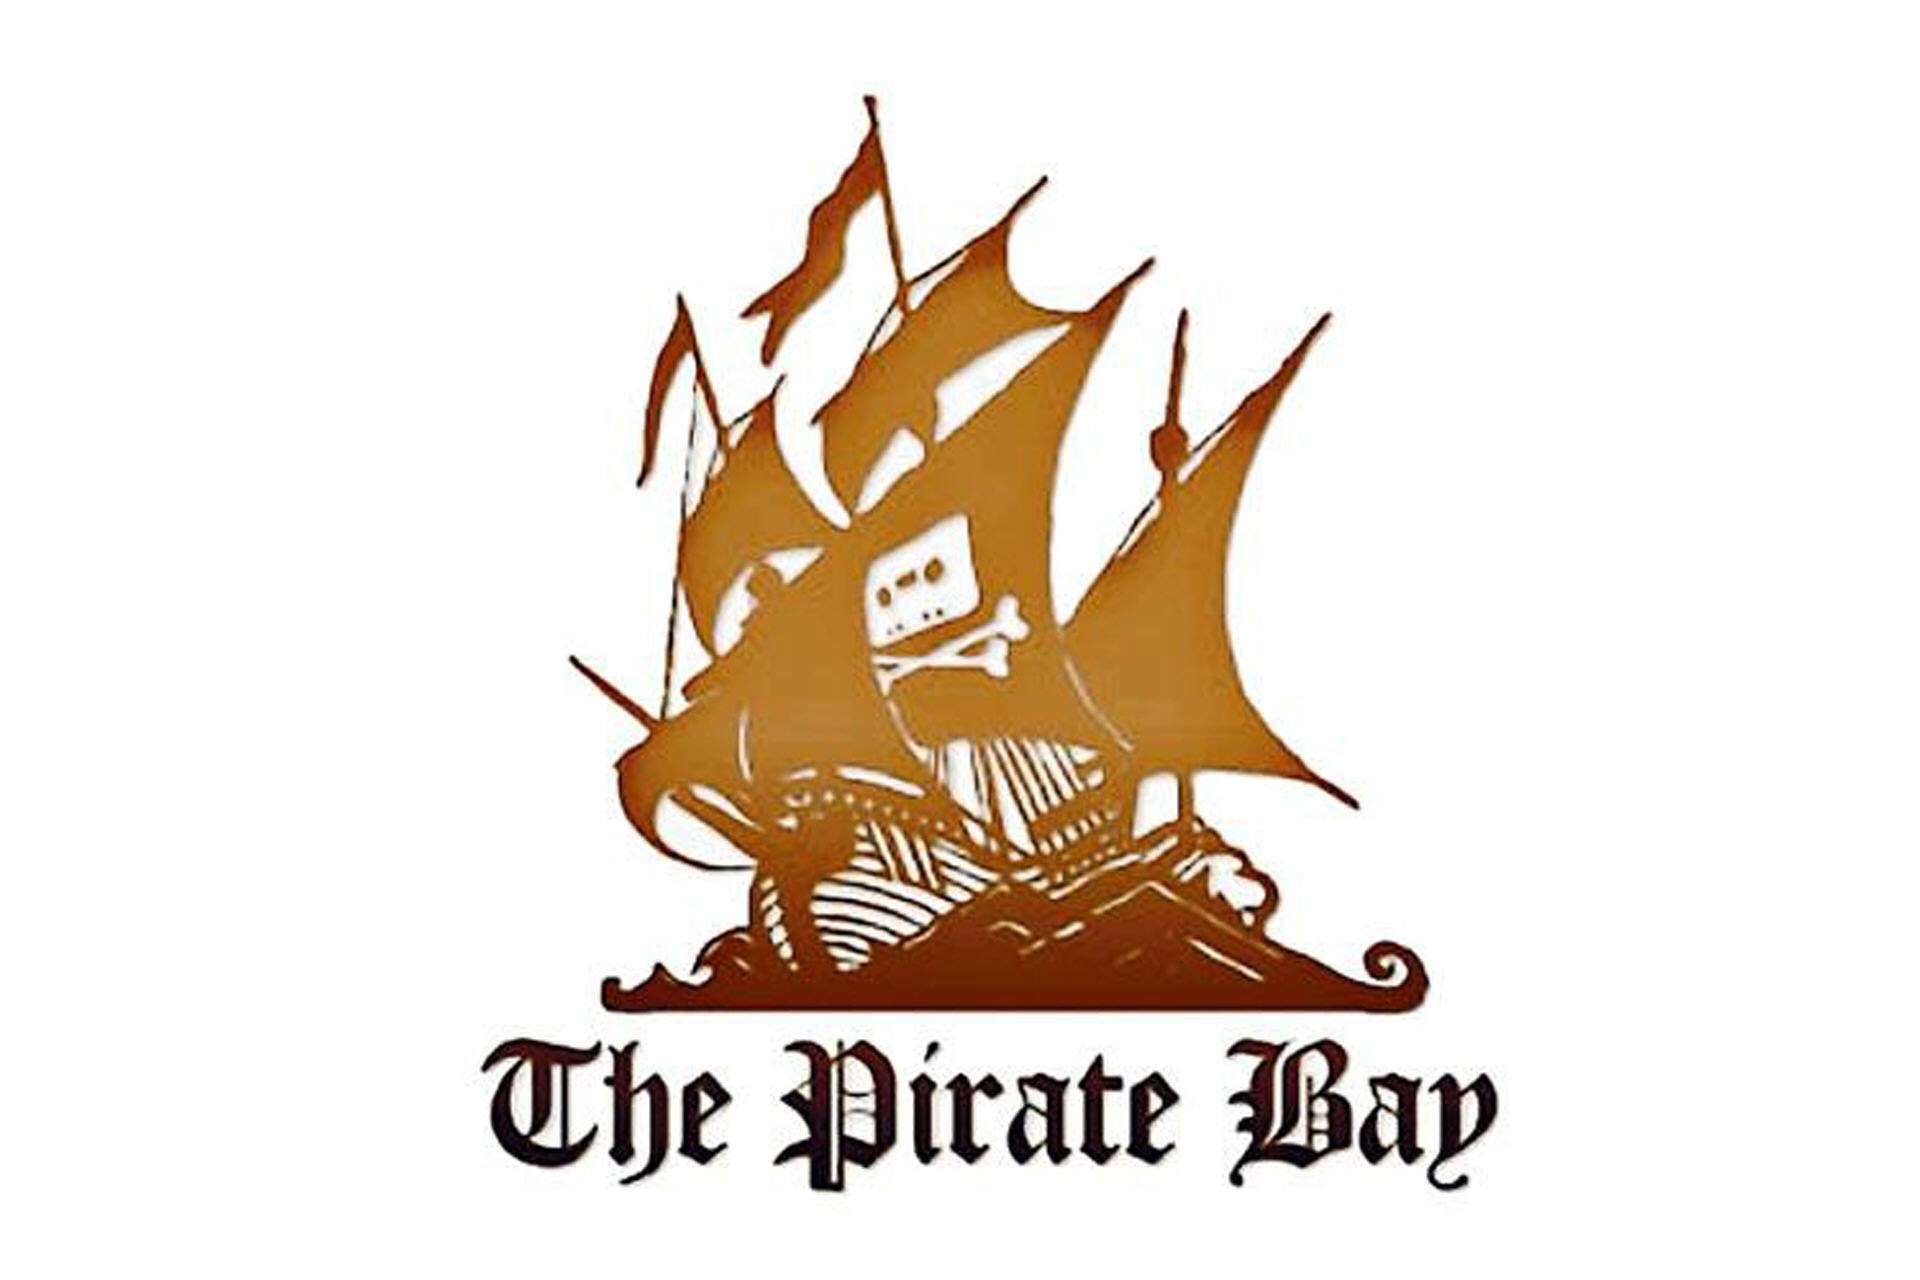 YAAAR mateys! The Pirate Bay is now streaming.